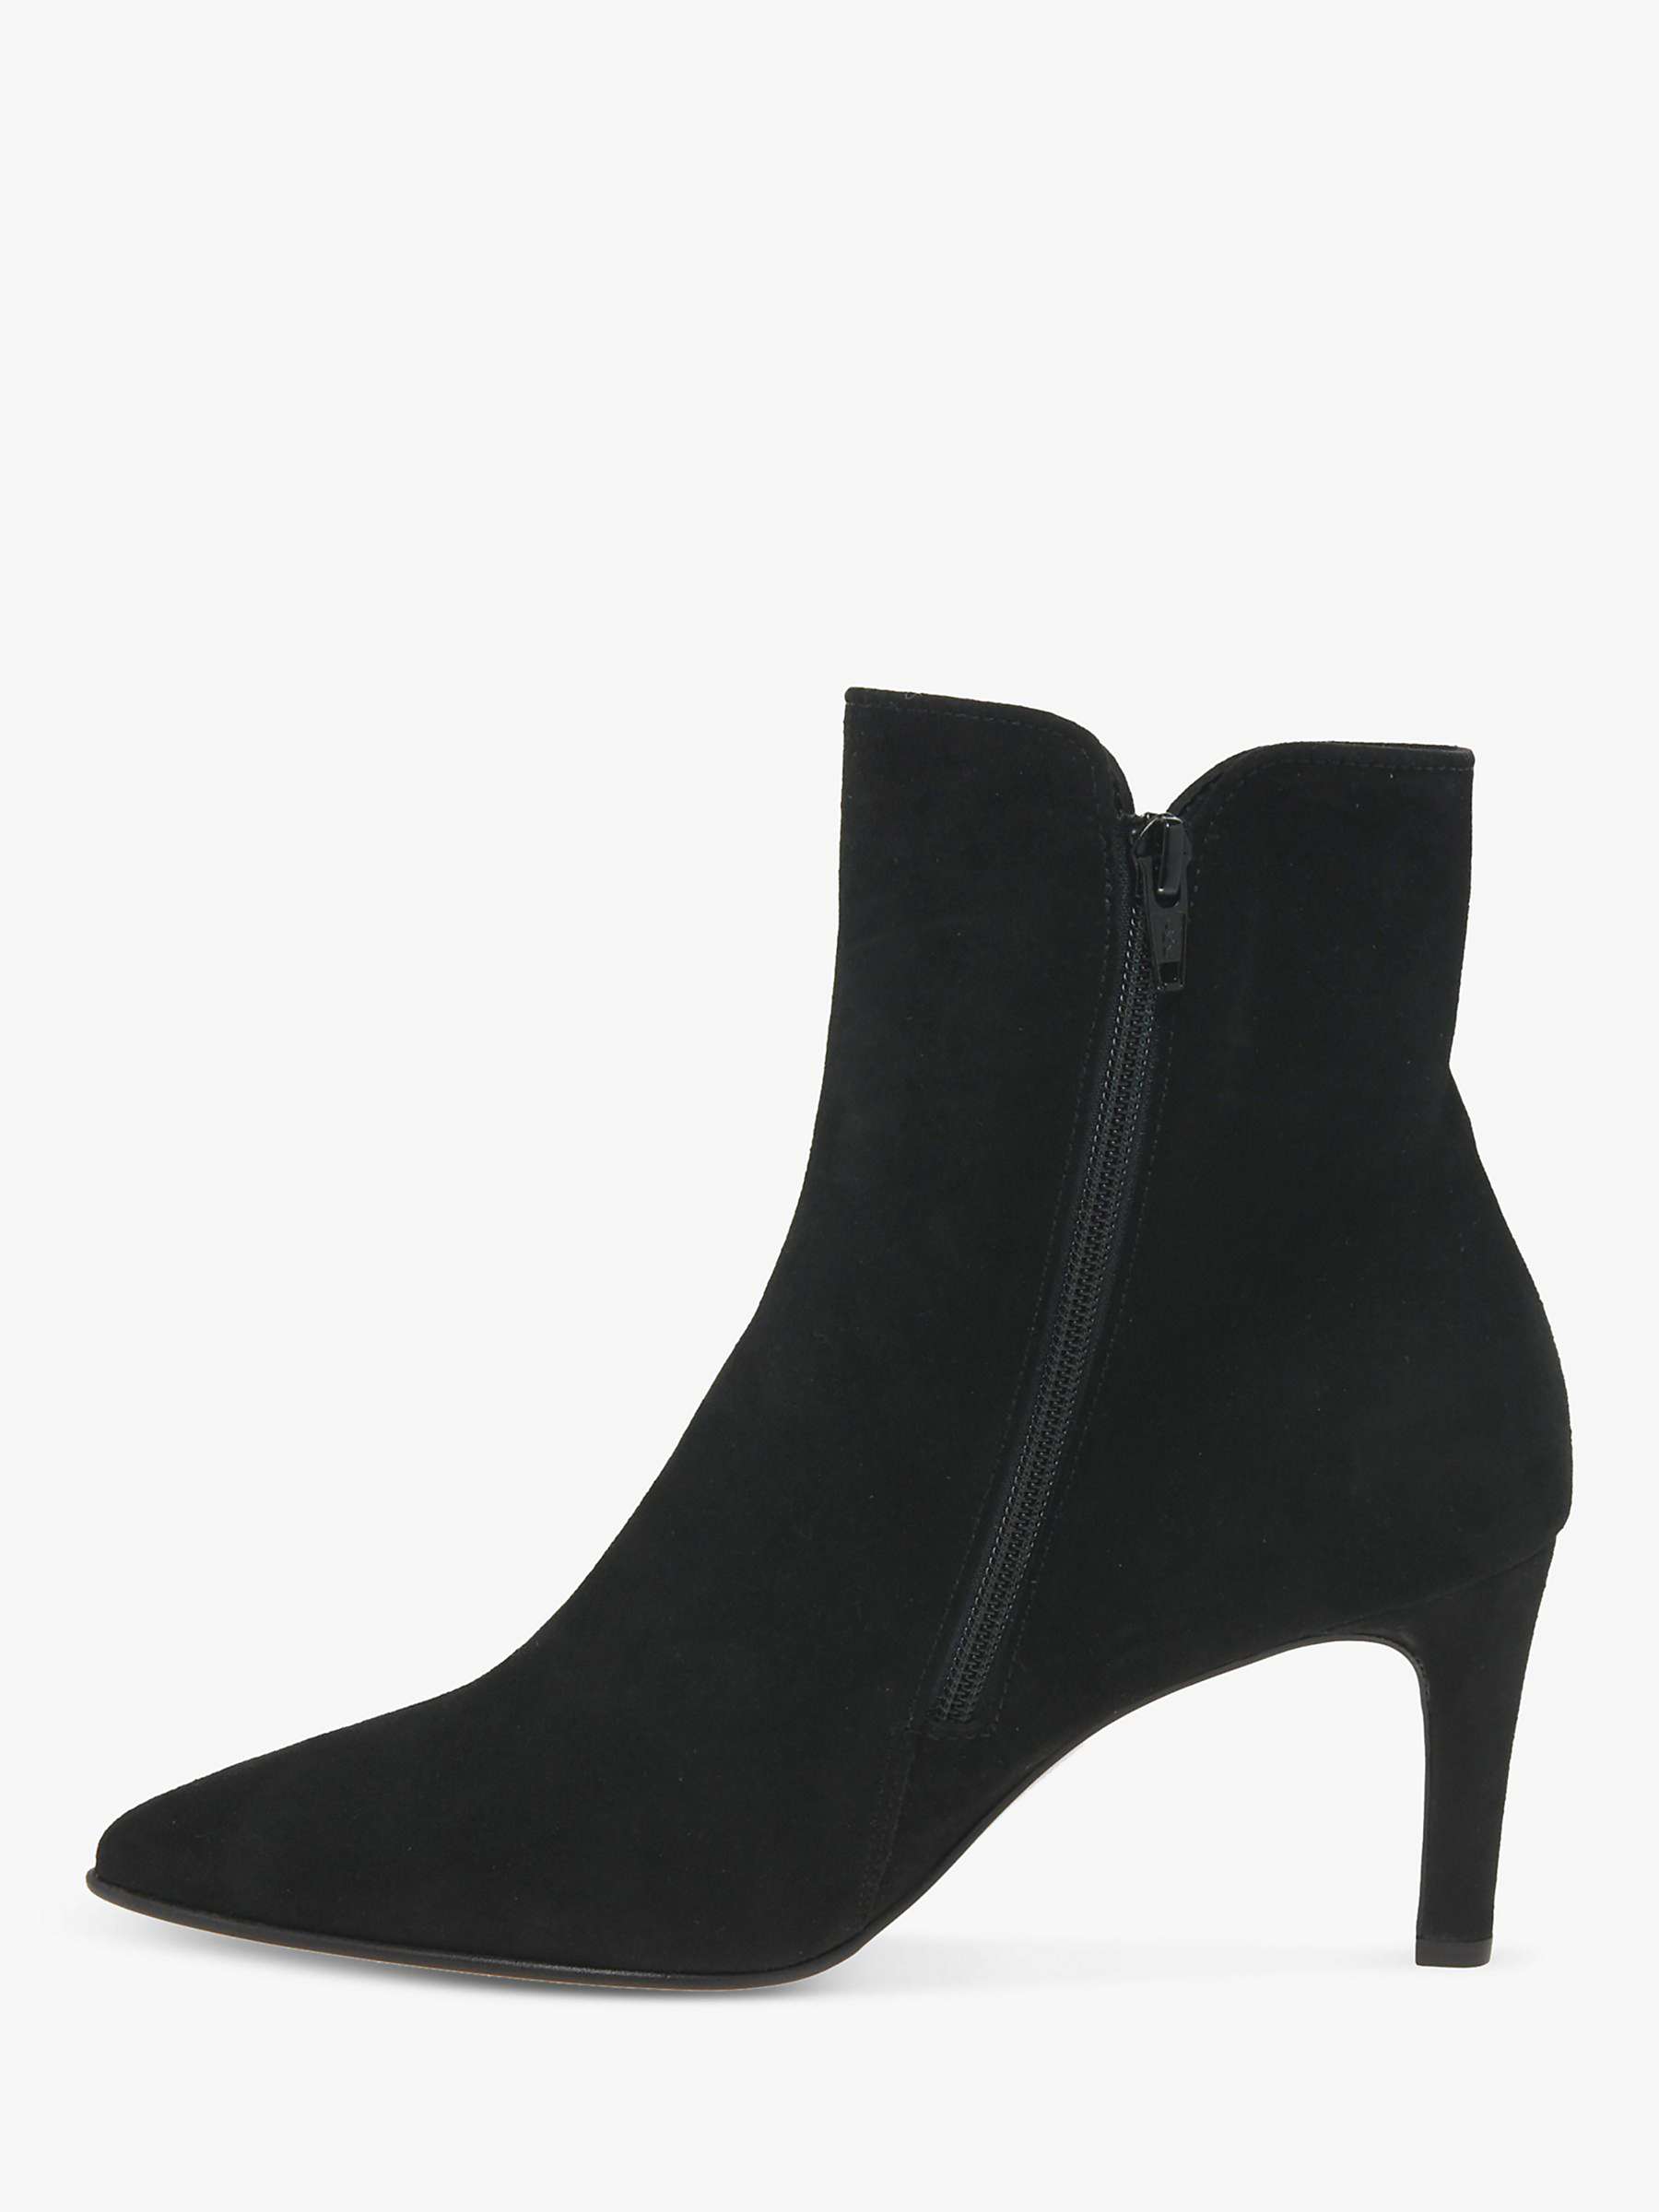 Gabor Bambro Dressy Suede Mid Heel Ankle Boots, Black at John Lewis ...